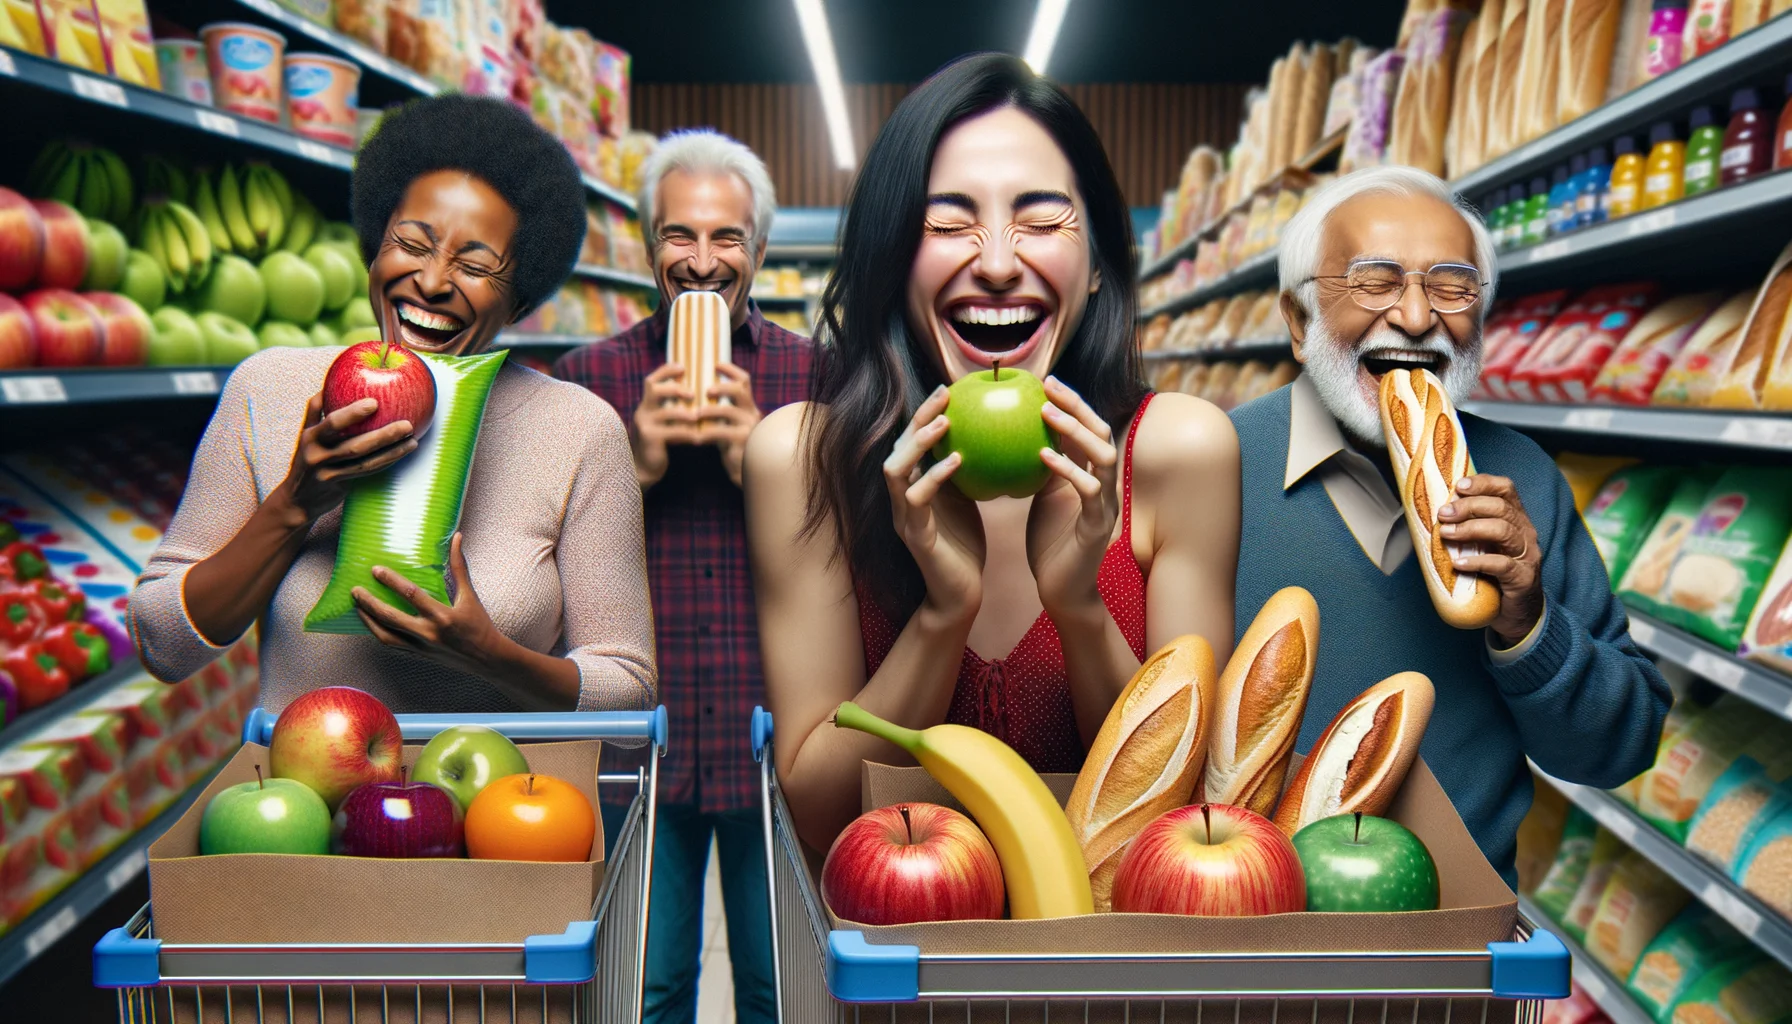 Imagine an amusing and hyper-realistic scene to reflect eco-friendly, edible packaging solutions in an ideal situation. Picture a grocery store aisle where customers are laughing and amazed as they discover and taste the packaging of their purchases. In the forefront, visualize a Hispanic woman pause while unpacking her groceries, delightfully biting into a brightly colored apple packaging. To her left, an elderly South Asian man cheerfully nibbling on the wrapper of his freshly bought baguette. Each package, whether it's fruits, cereals or dairy, unfolds an innovative, sustainable and comically unprecedented culinary experience.